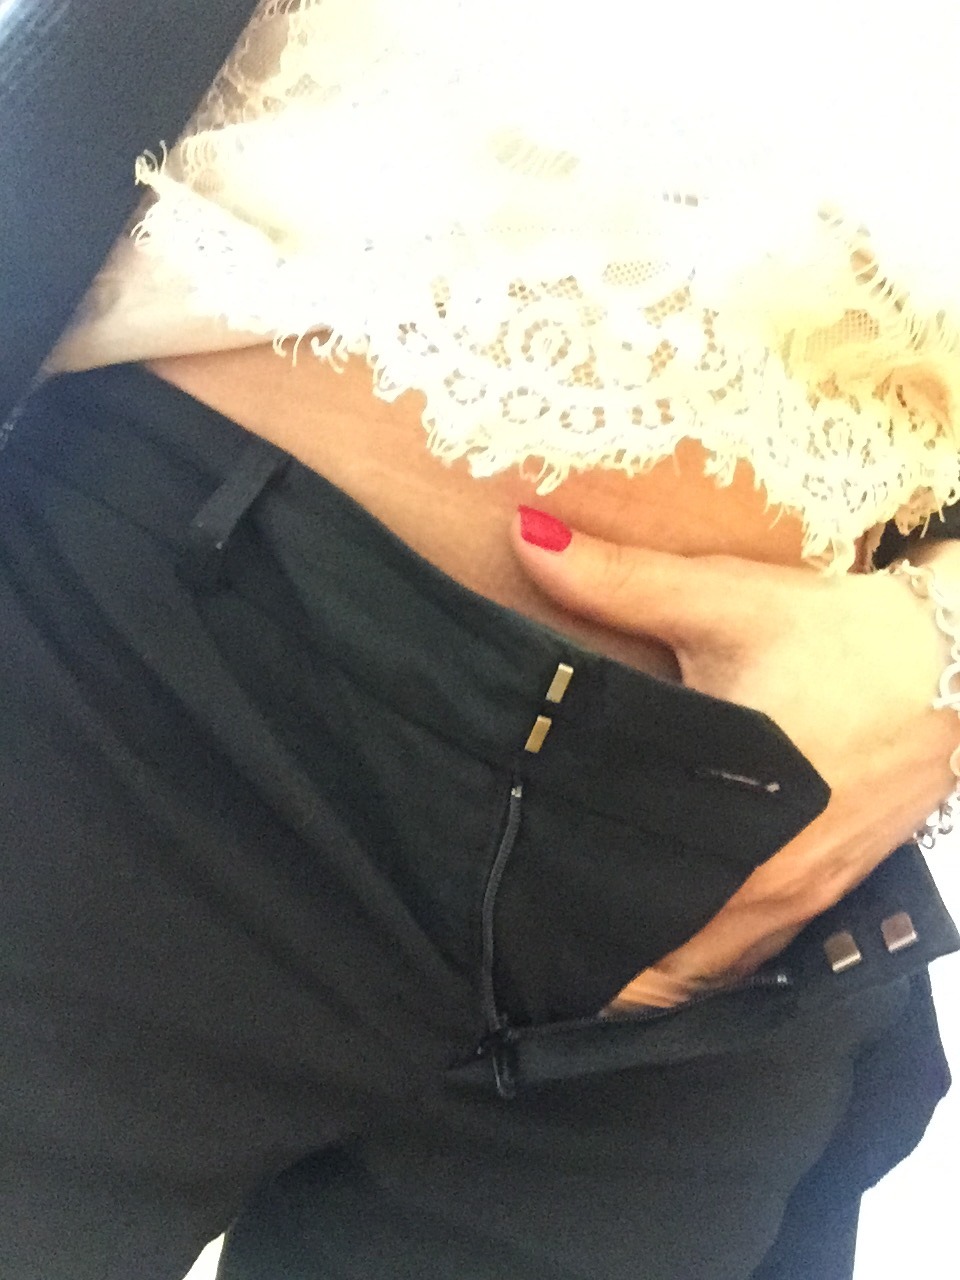 naughty253:  I was teasing my man by sending him naughty pics from work and in the